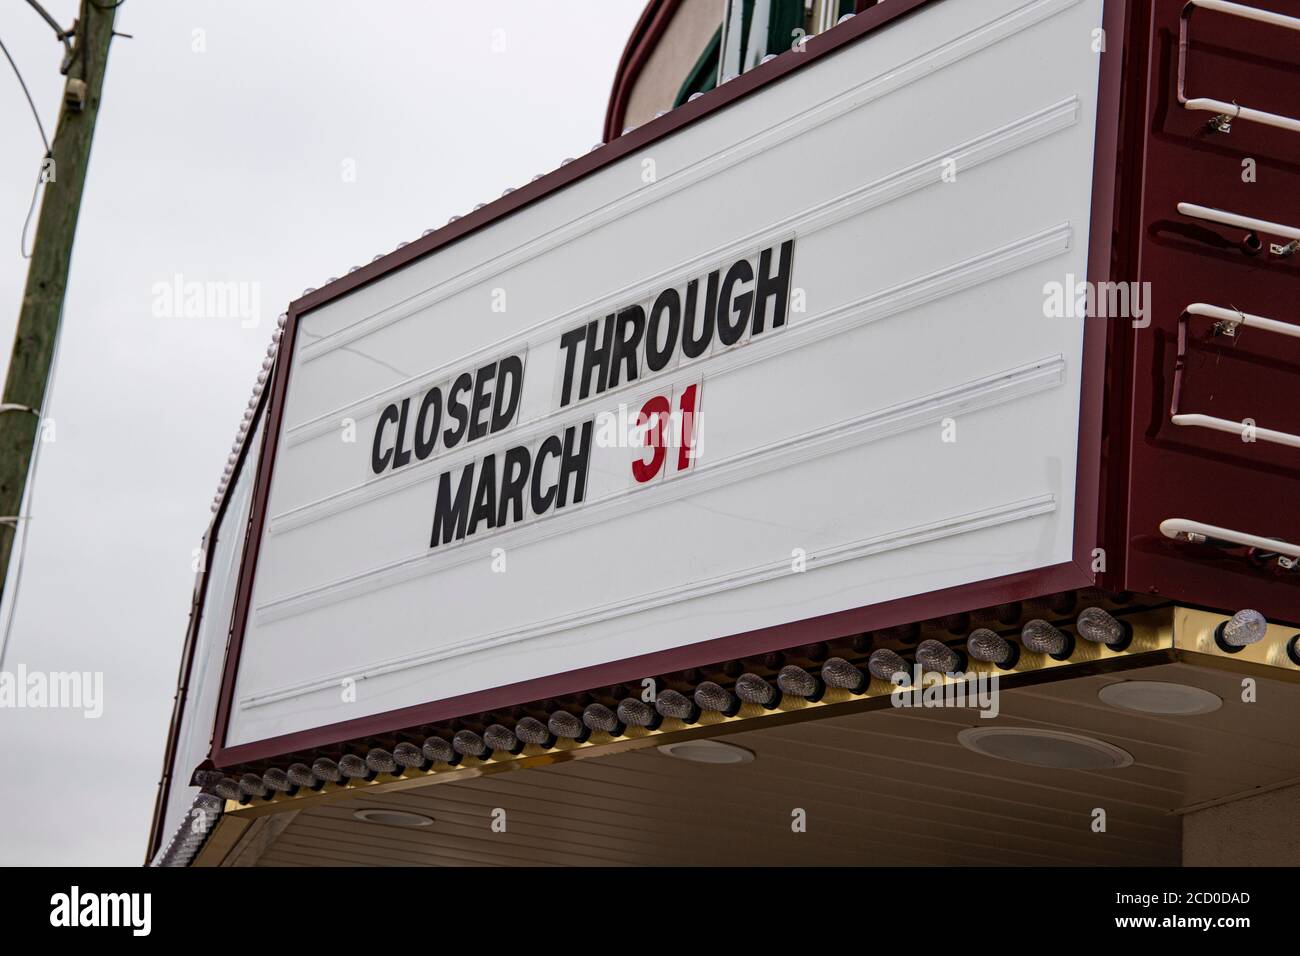 Heber Springs, AR.Businesses close, including a movie theater, bank, and church due to coronavirus pandemic. March 20, 2020. @ Veronica Bruno / Alamy Stock Photo